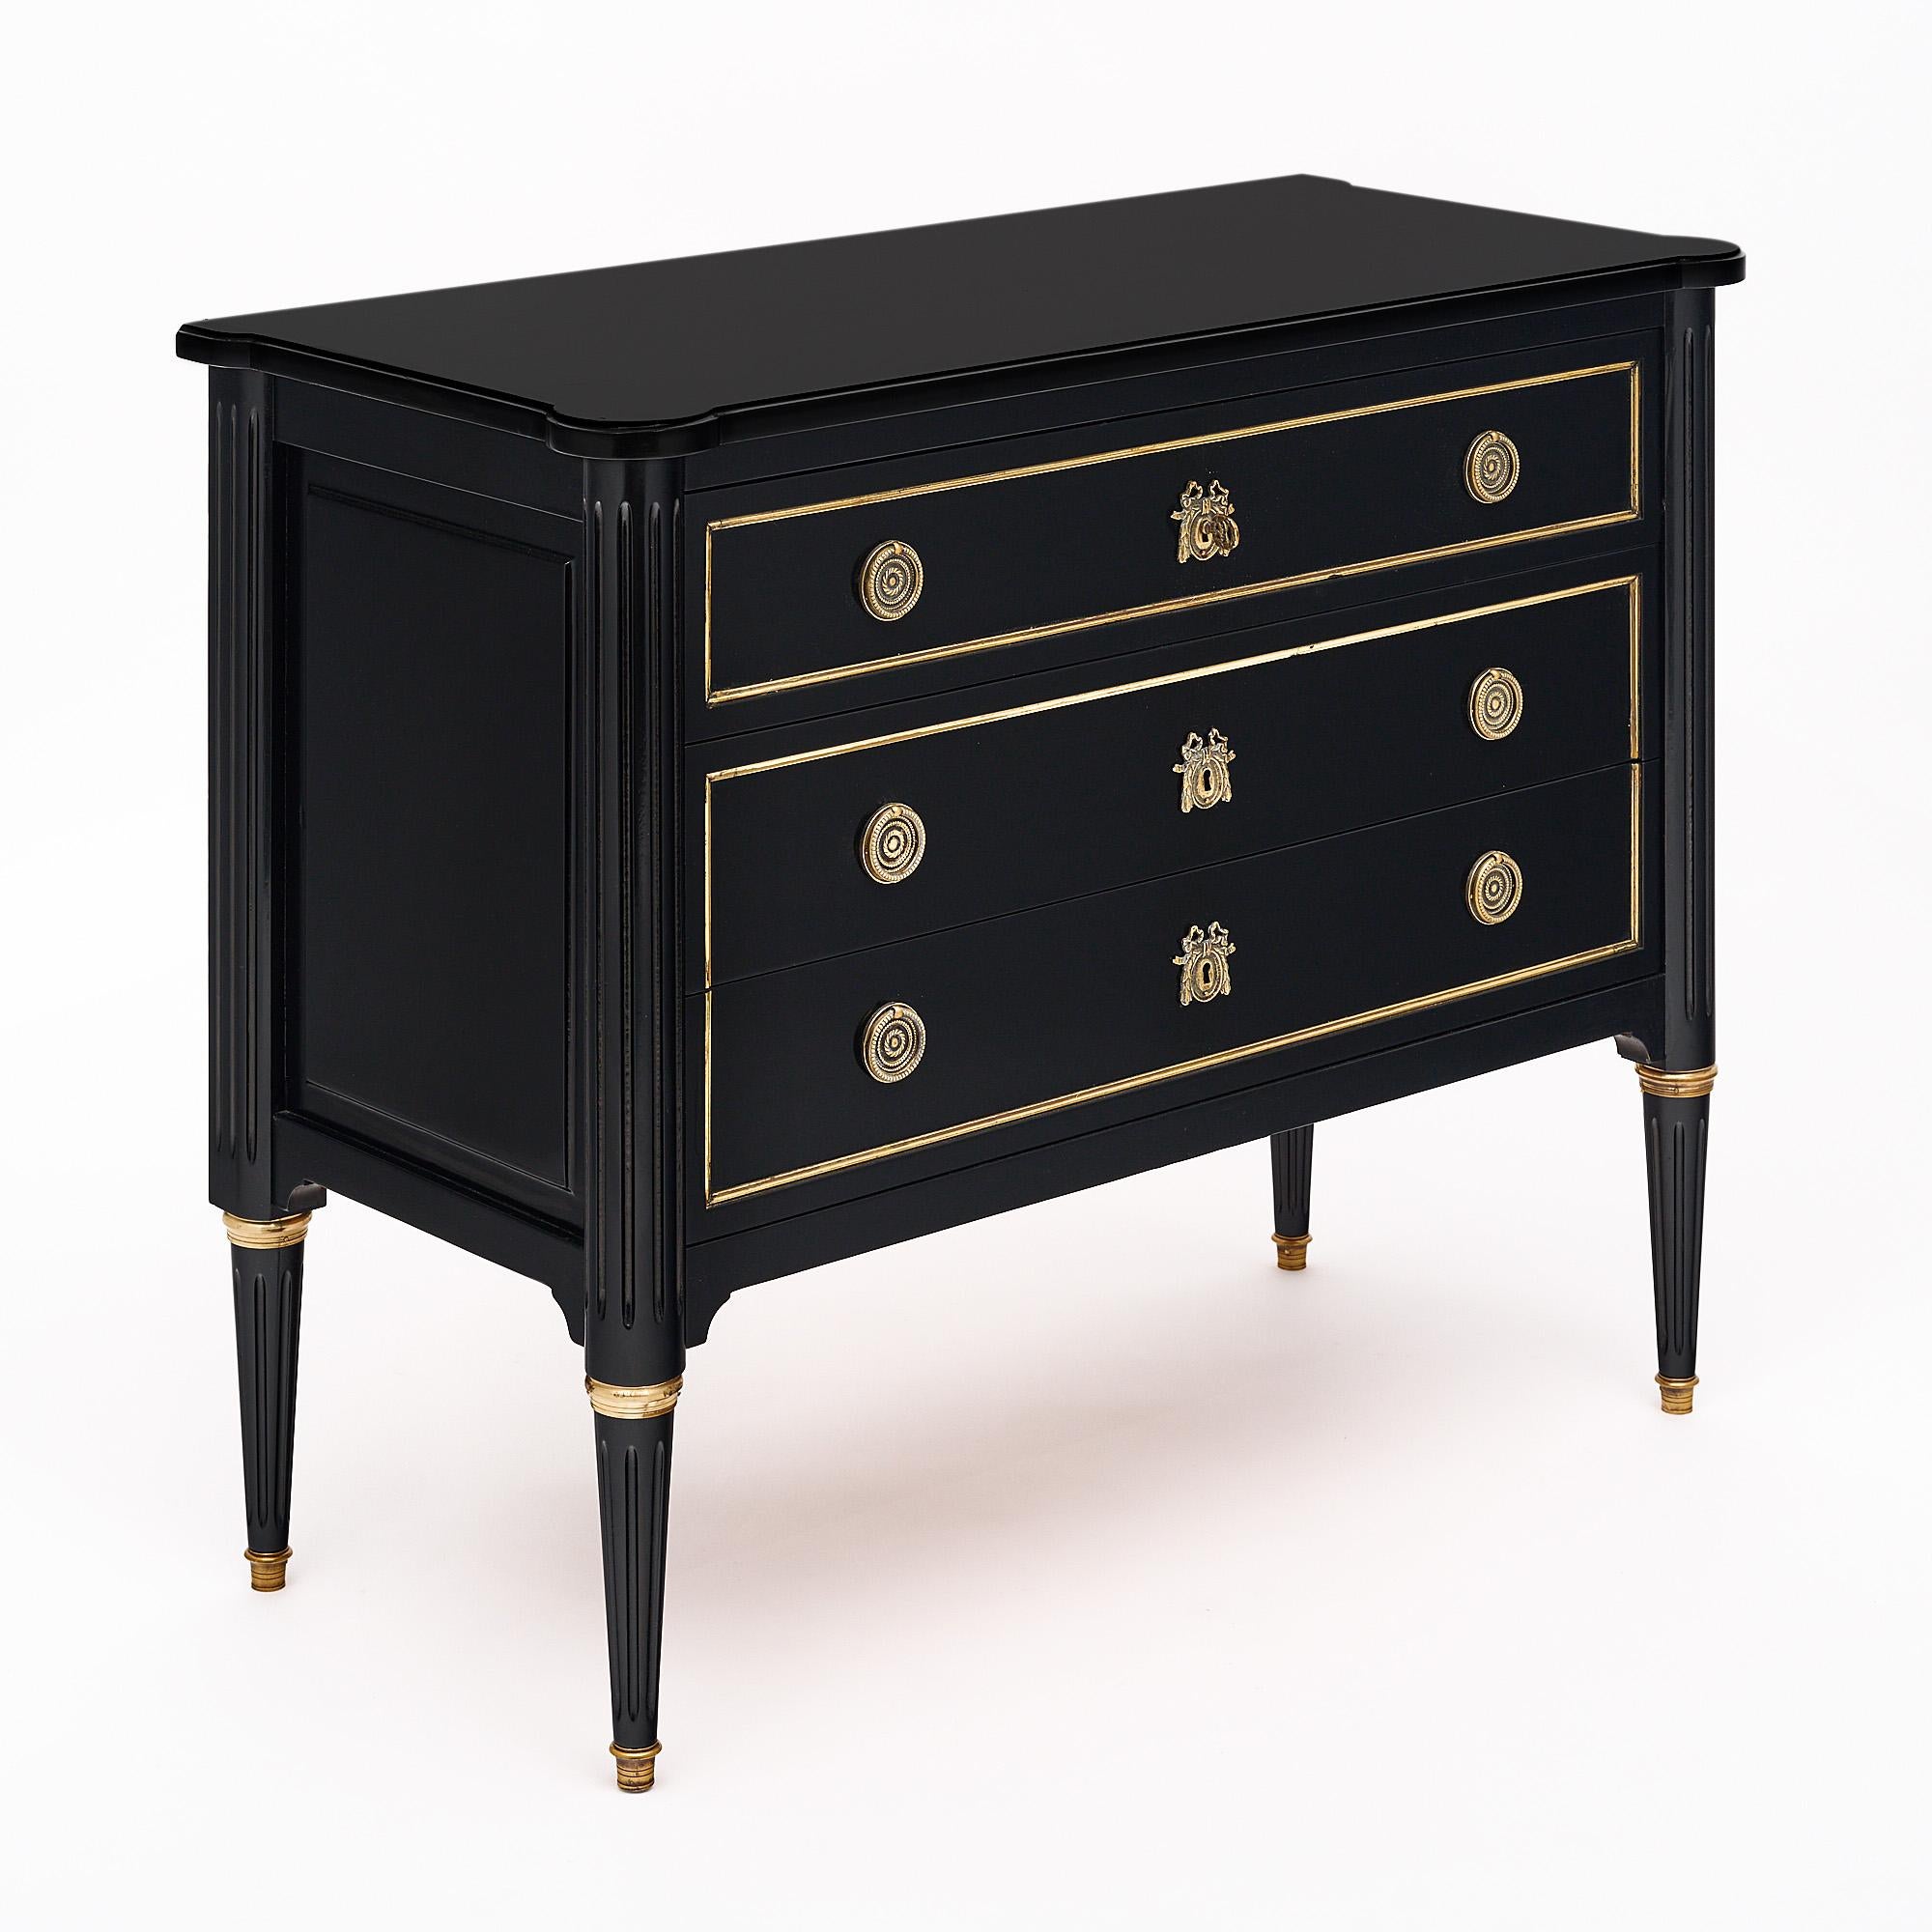 Chest of drawers, French, Louis XVI style, of mahogany, three dovetailed drawers, four tapered and fluted legs, the petite commode is  ebonized and finished in a lustrous Museum quality French polish, gilt brass throughout and finely cast hardware.